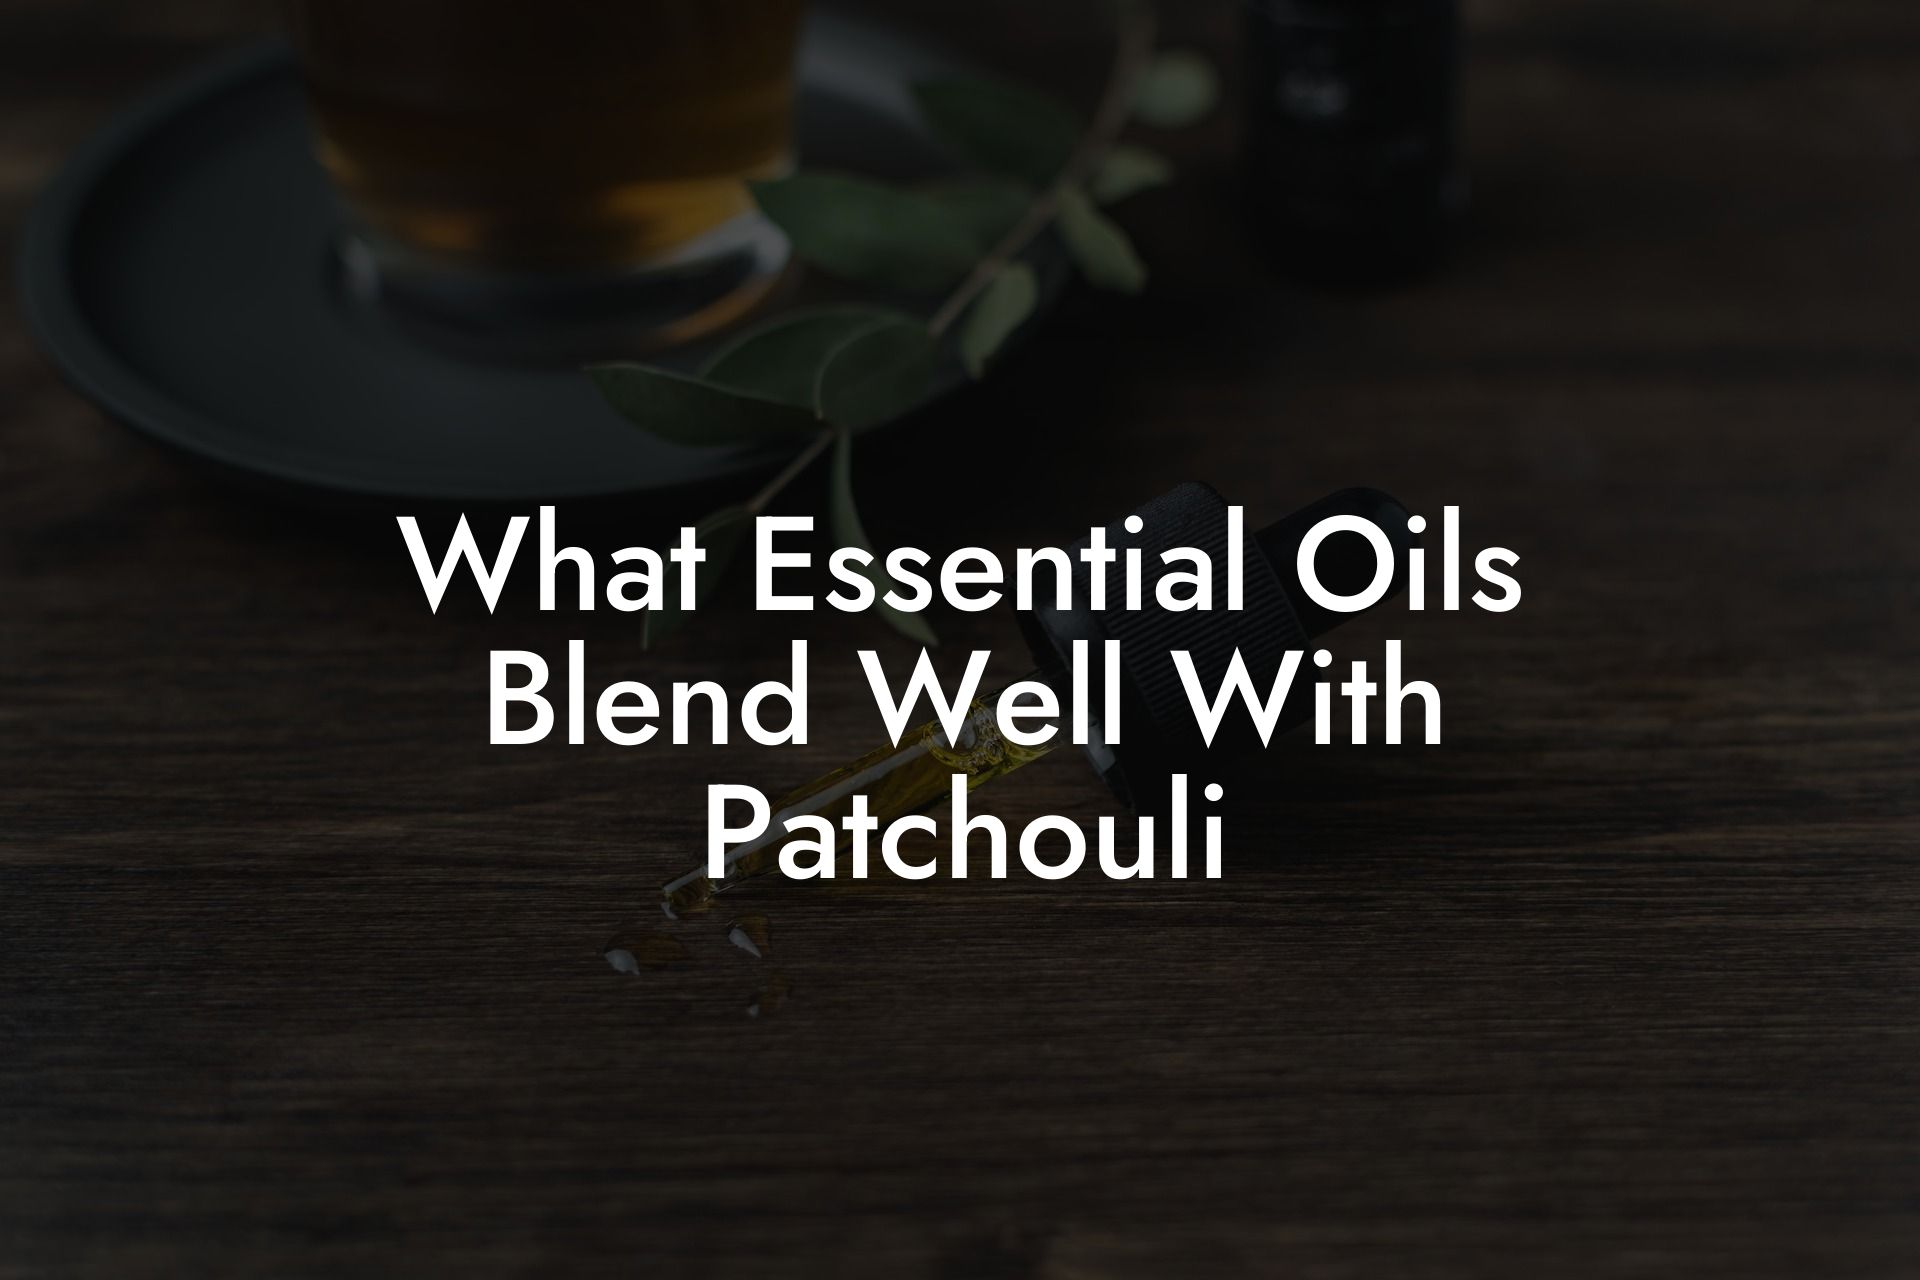 What Essential Oils Blend Well With Patchouli